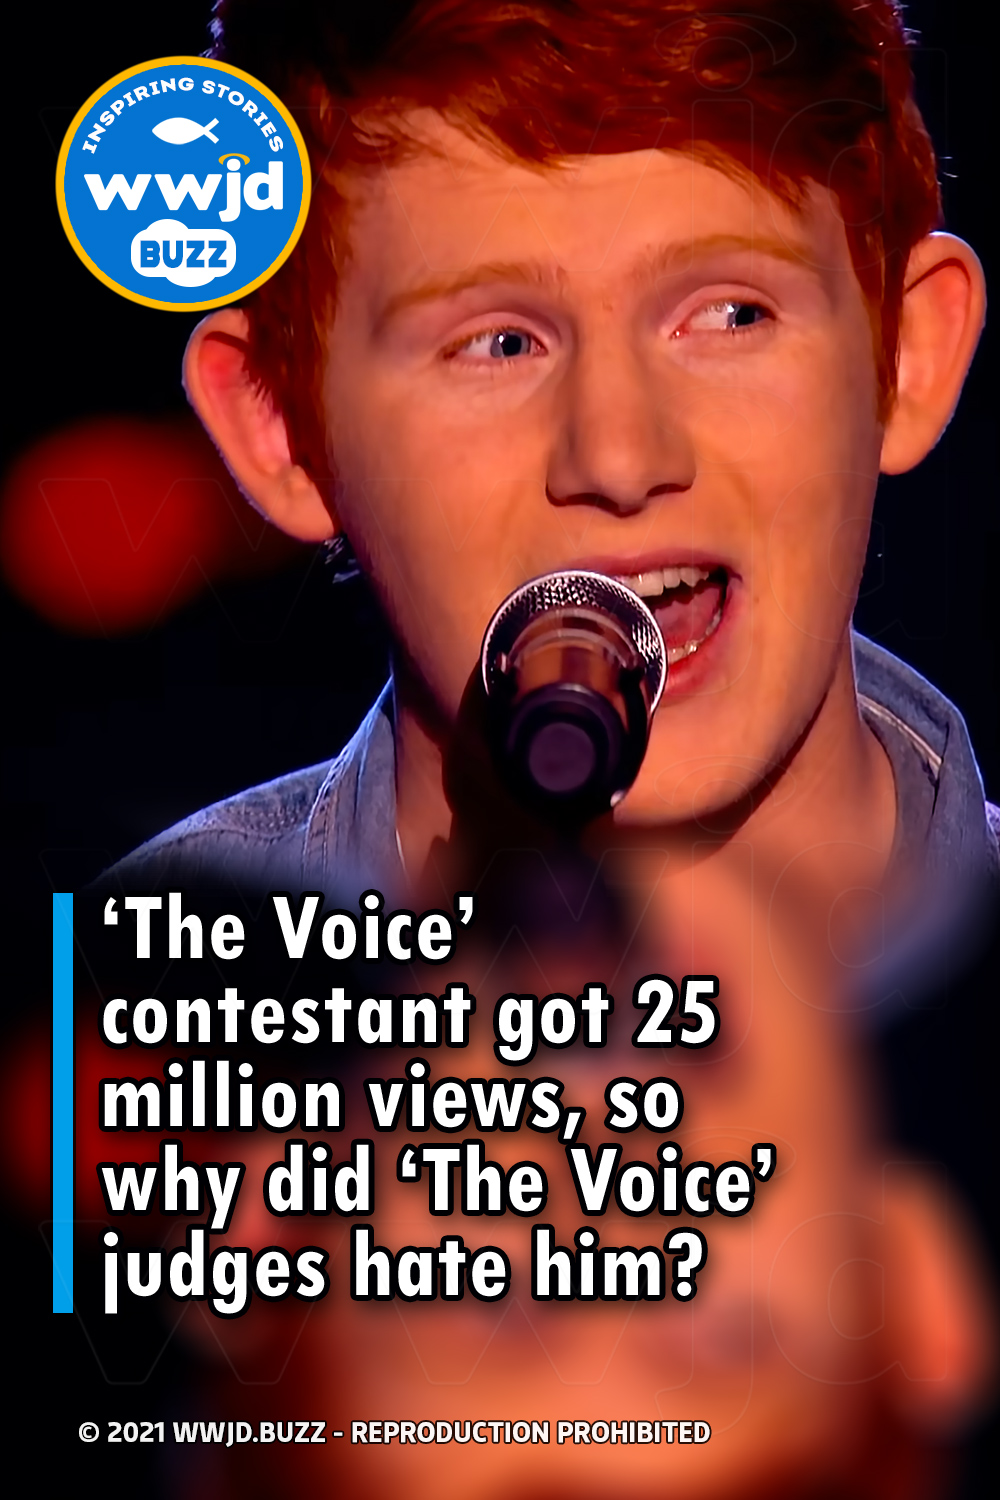 ‘The Voice’ contestant got 25 million views, so why did ‘The Voice’ judges hate him?